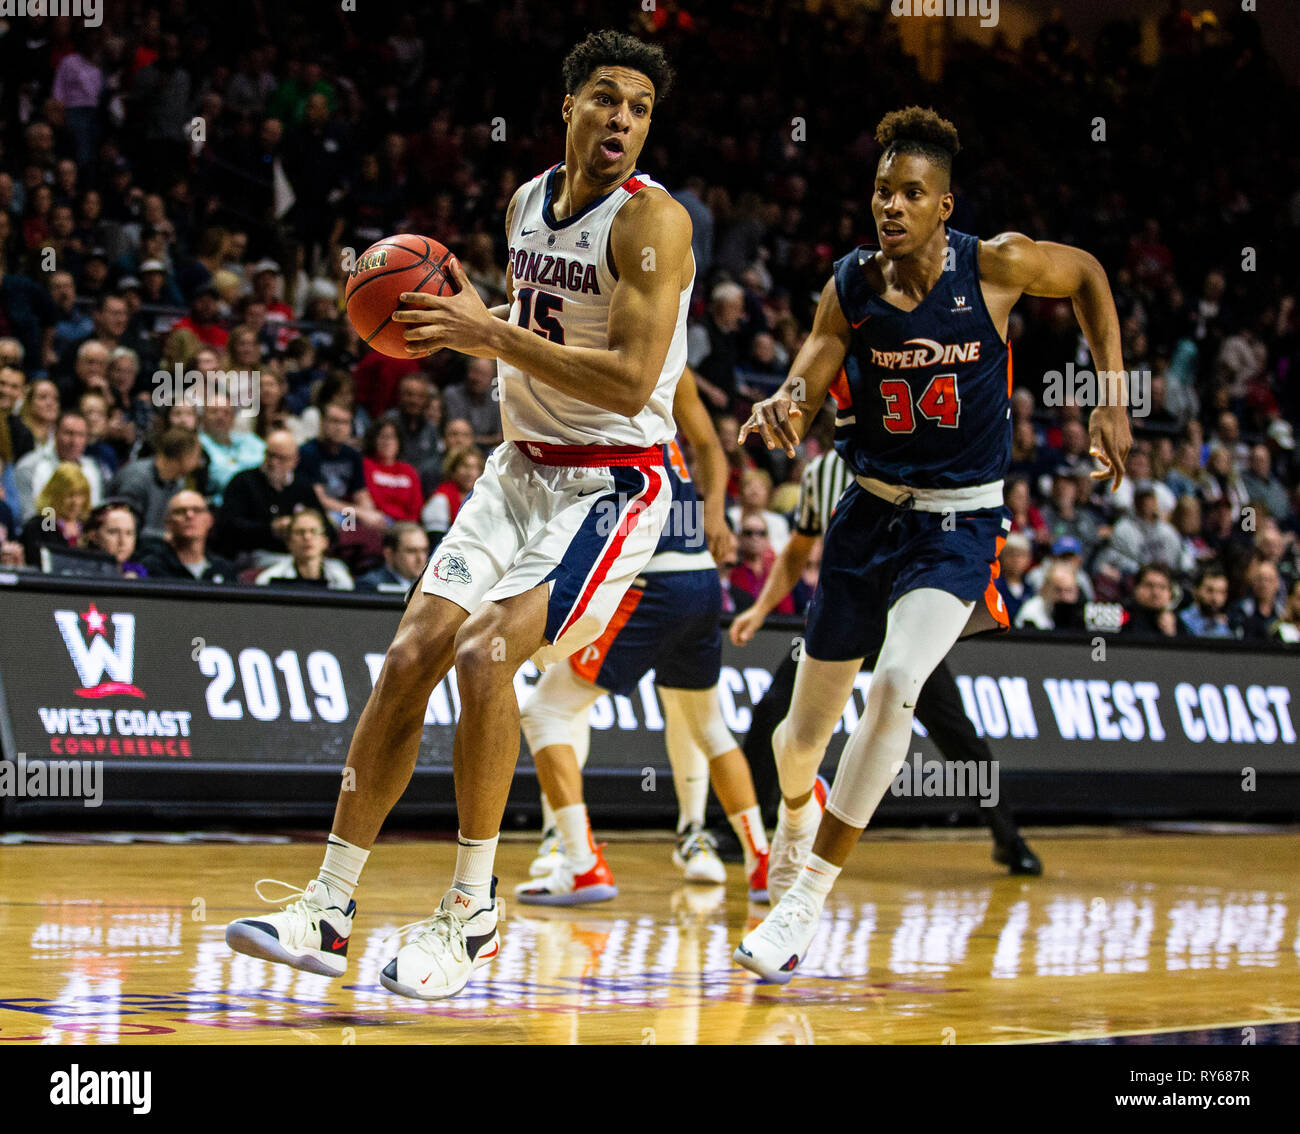 Mar 11 2019 Las Vegas, NV, U.S.A. Gonzaga forward Brandon Clarke (15) drives to the basket during the NCAA West Coast Conference Men's Basketball Tournament semi -final between the Pepperdine Wave and the Gonzaga Bulldogs 100-74 win at Orleans Arena Las Vegas, NV. Thurman James/CSM Stock Photo